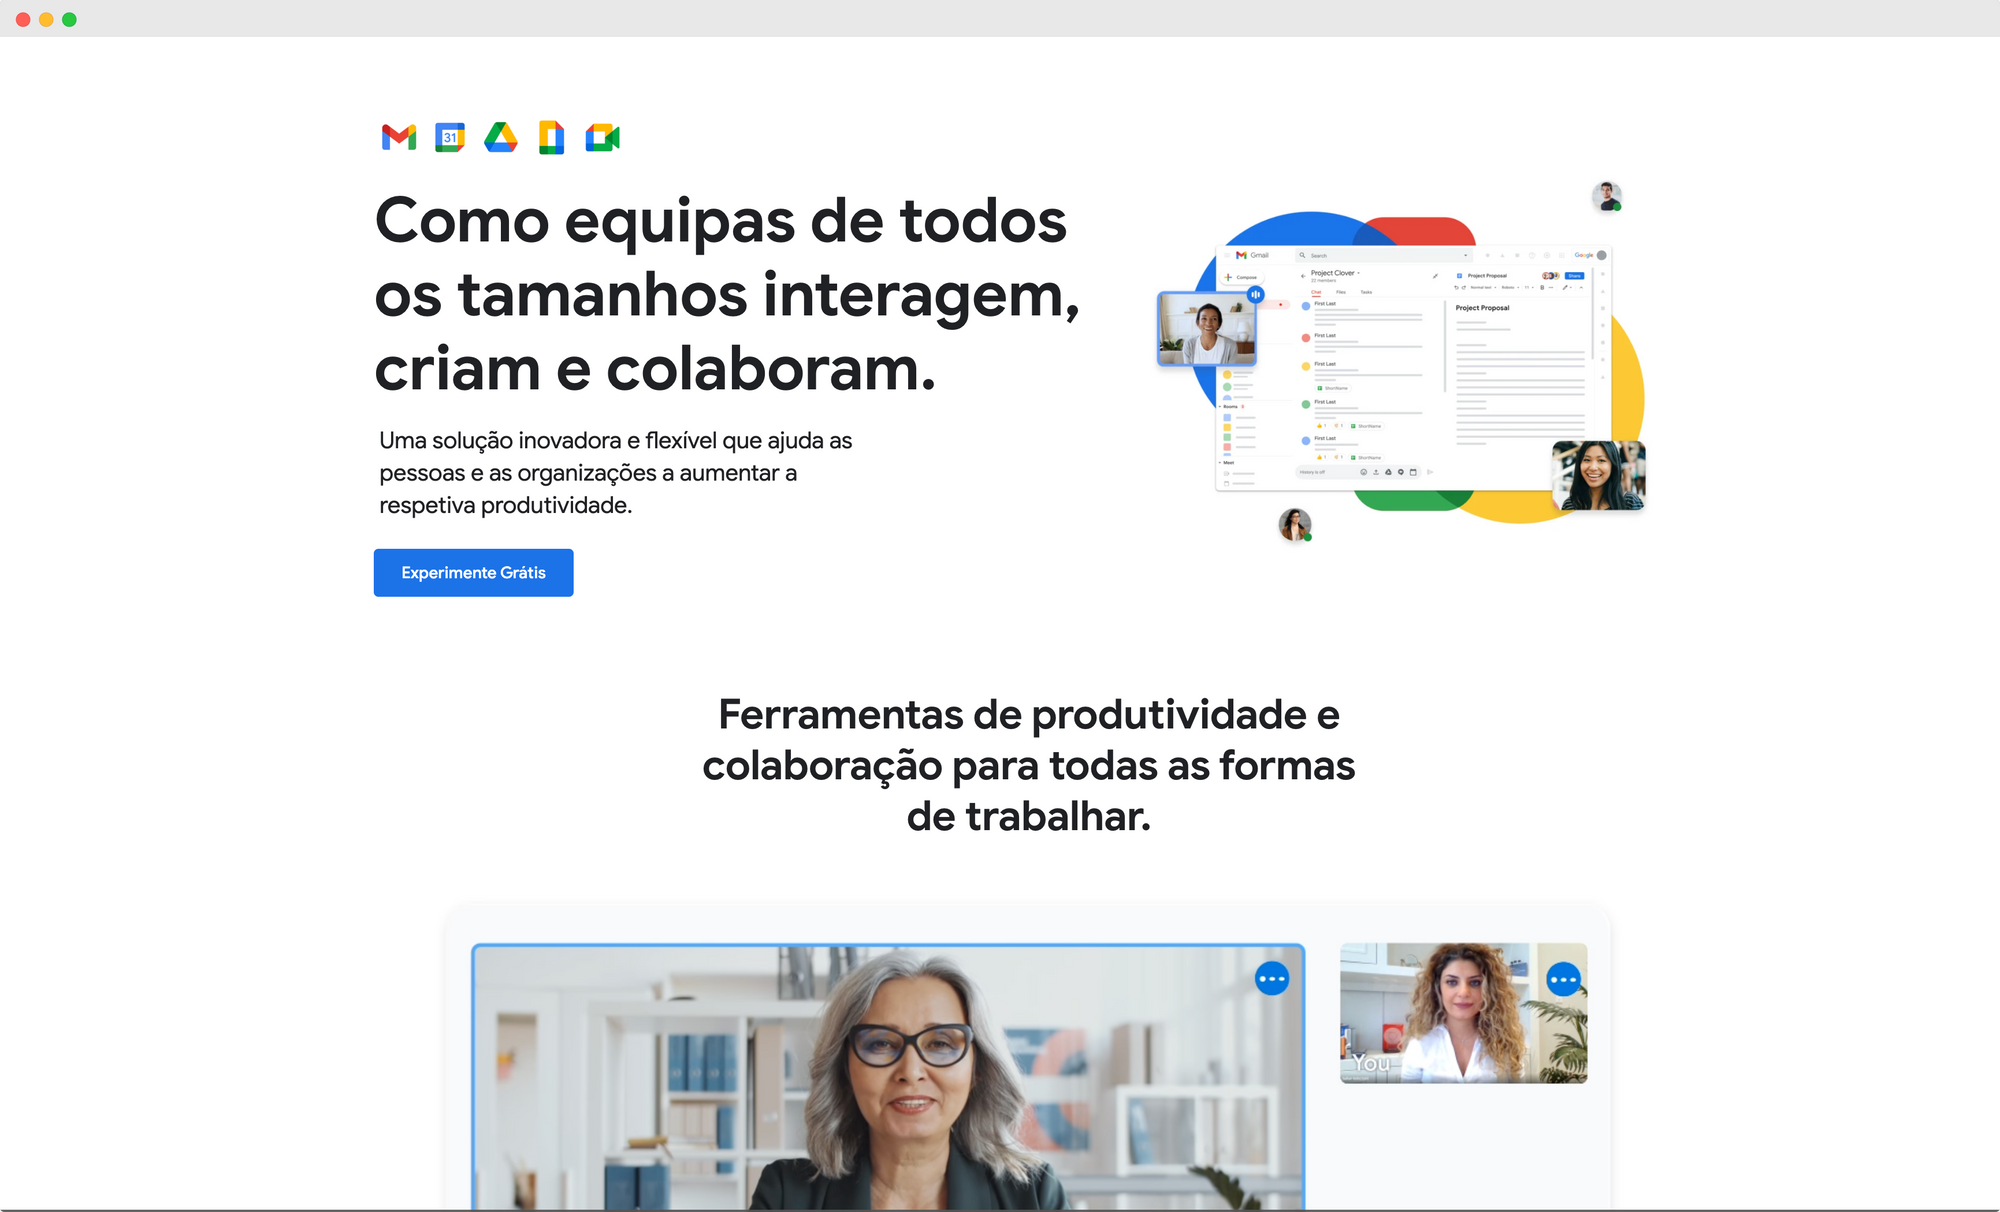 Portuguese Monday.com webpage showing productivity tools and team collaboration